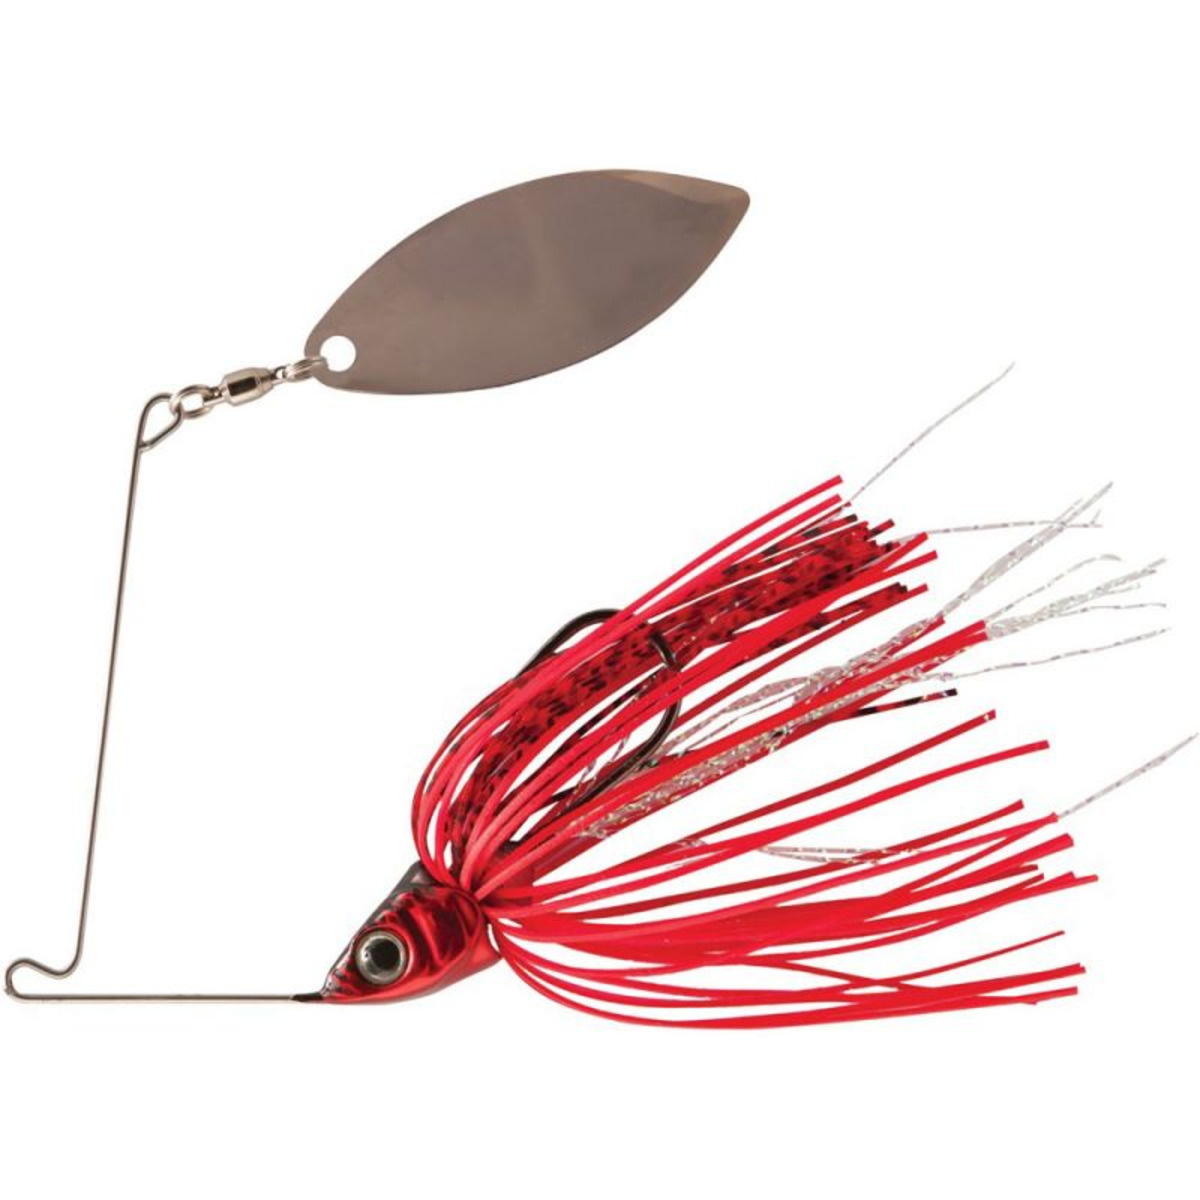 Rapture Sharp Spin Single Willow - 10.0 g - Red Hot